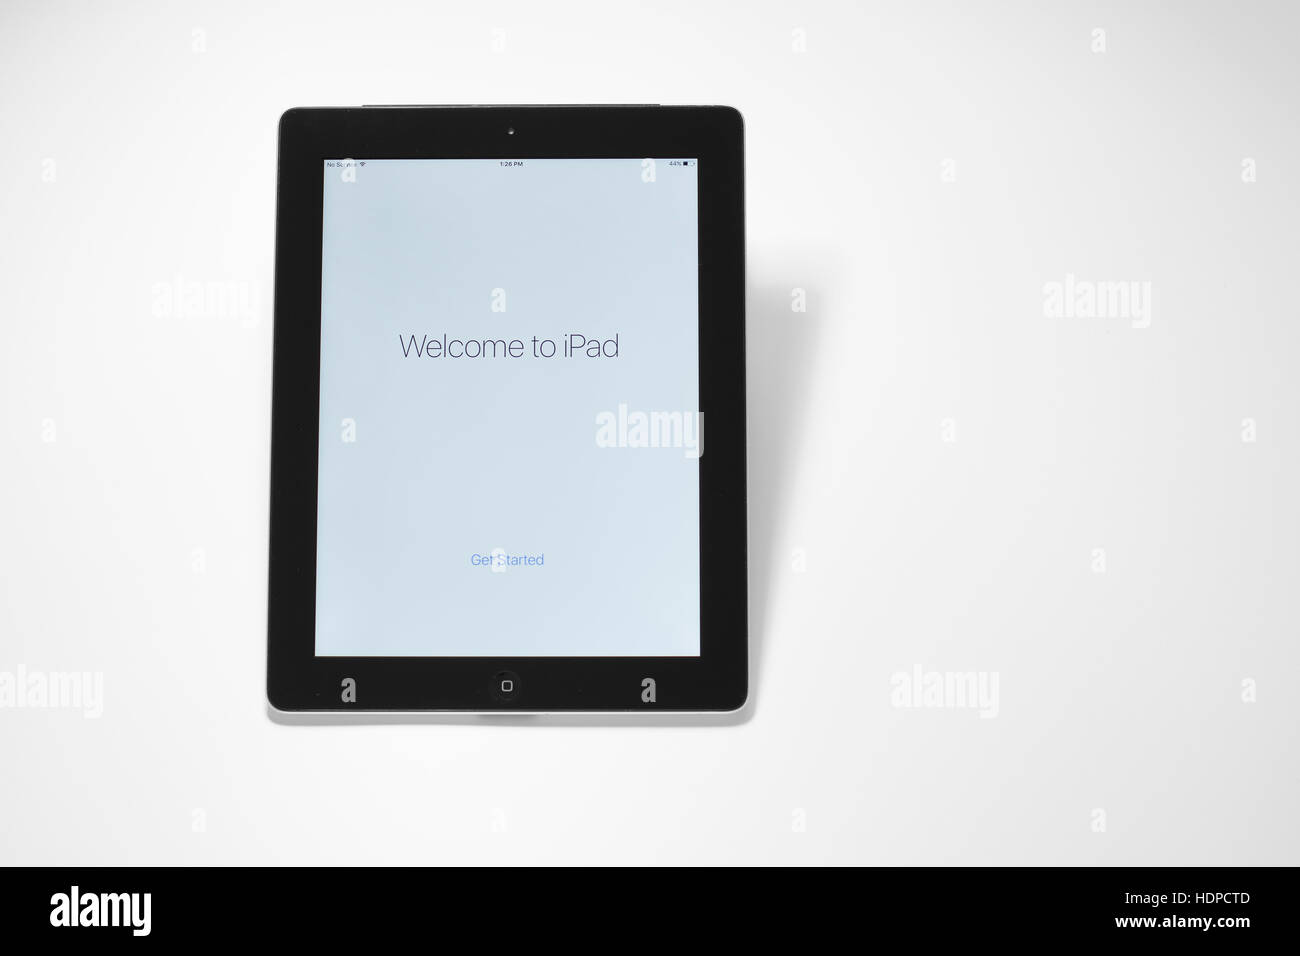 Ljubljana, Slovenia - December 8 2016: iPad 3 screen reads 'Welcome to iPad' and welcoming it's user after factory reset of the device, illustrative e Stock Photo